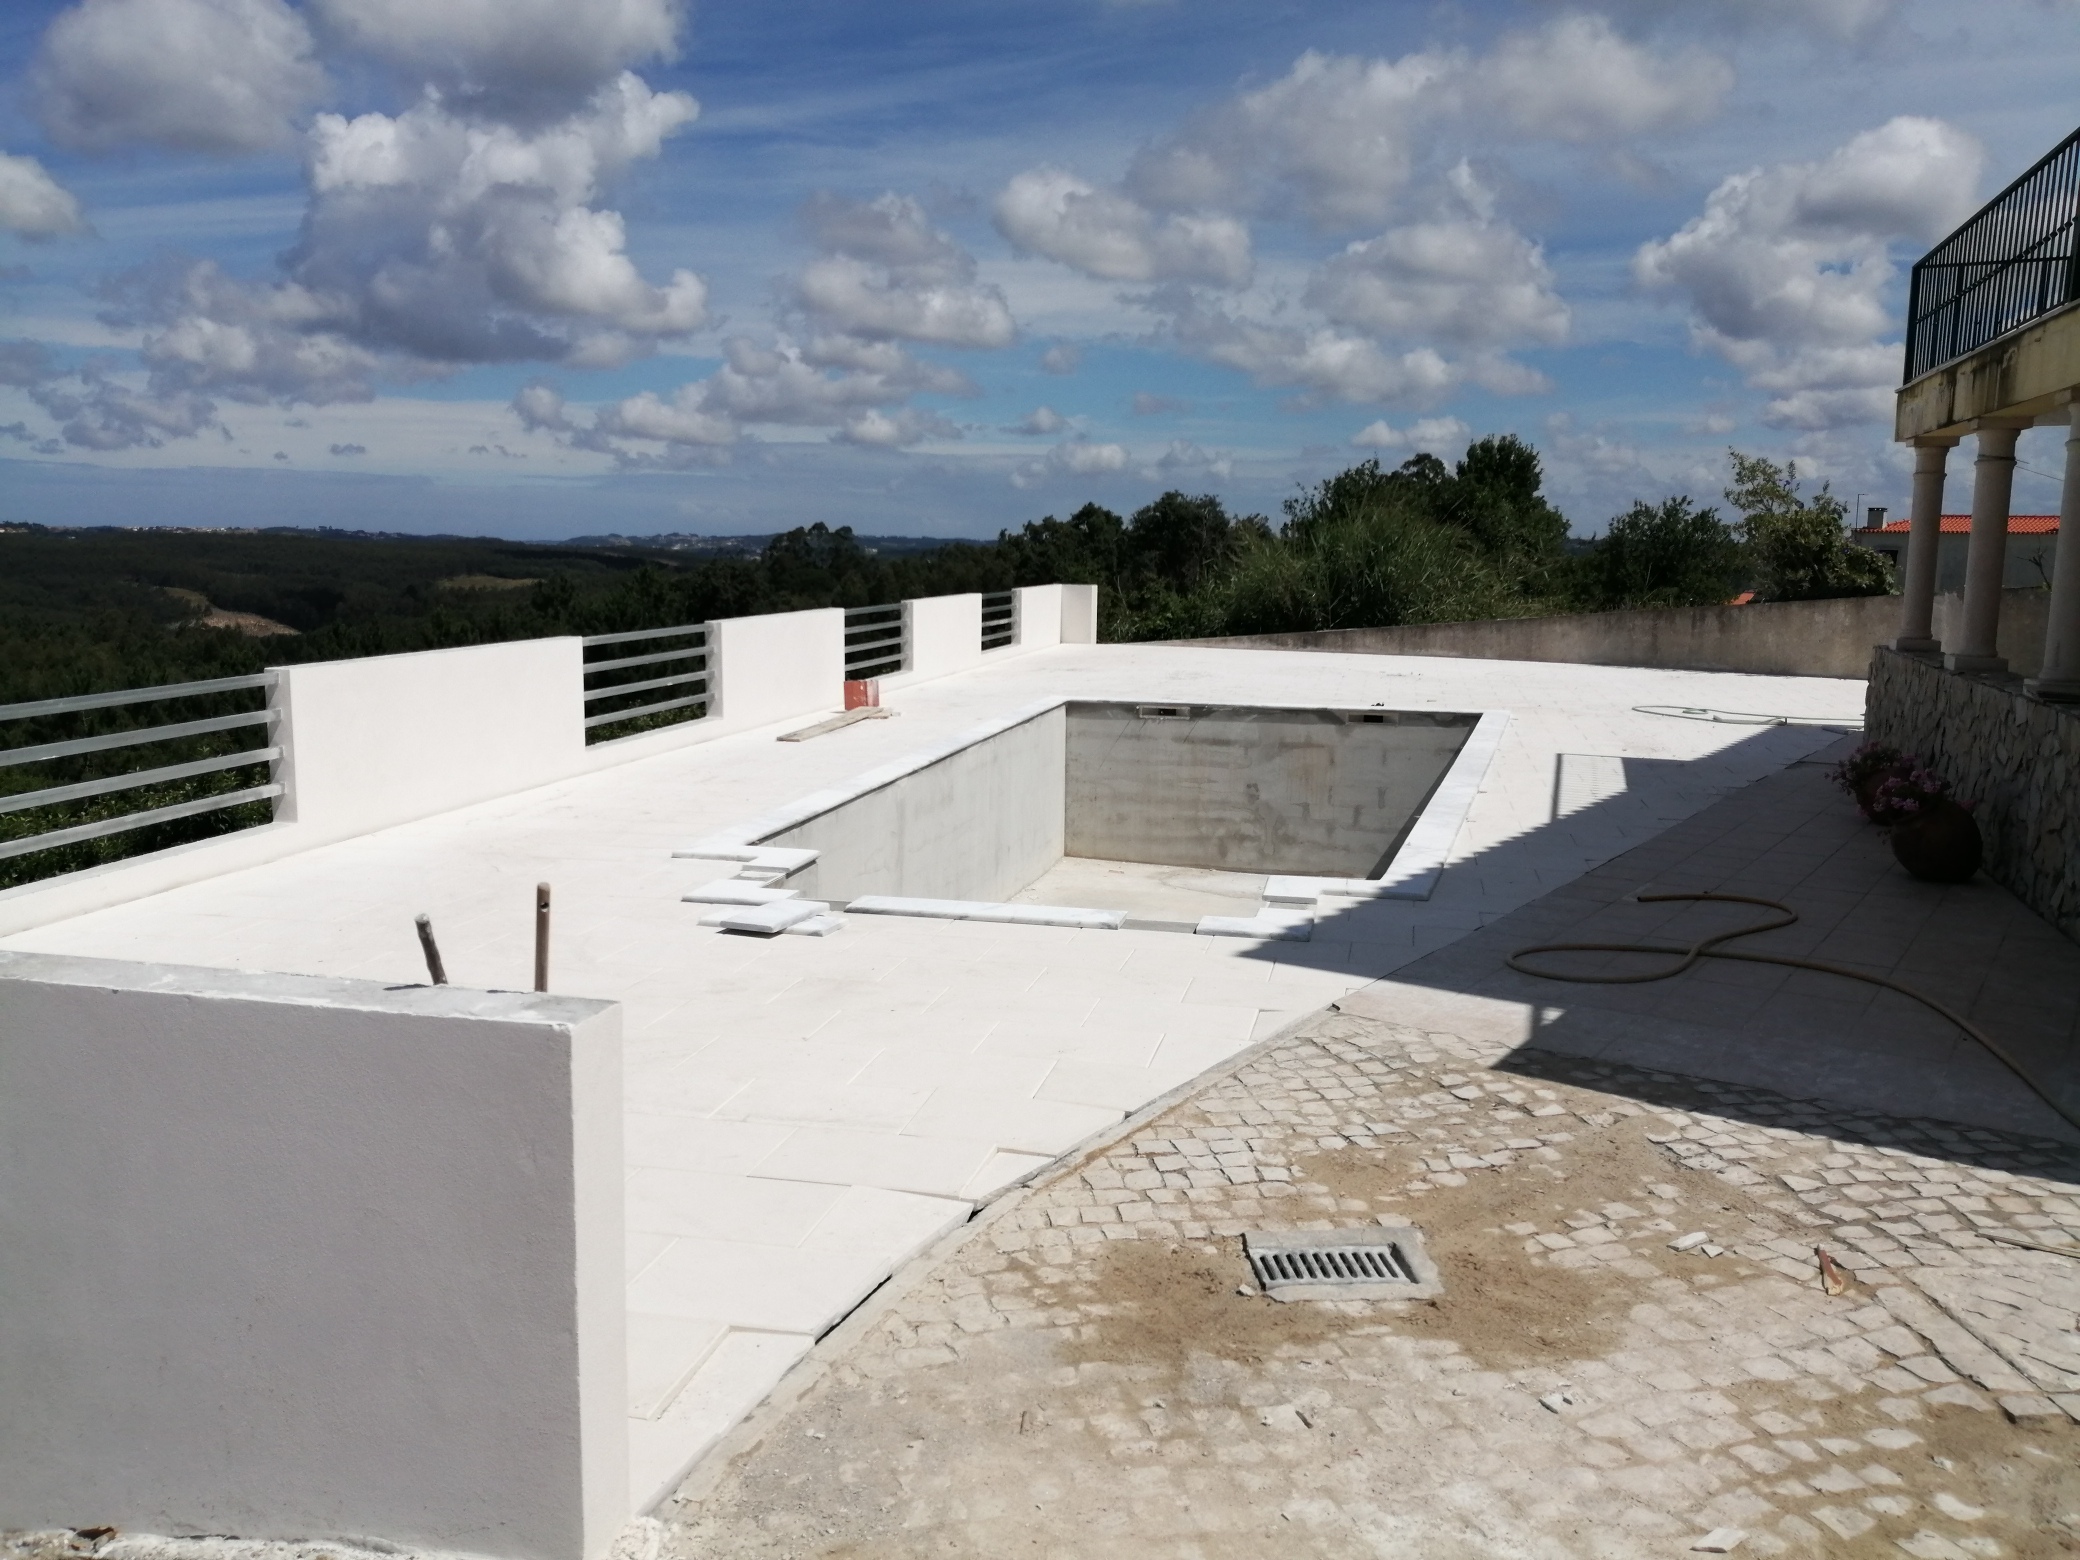 2 month portuguese pool project - Page 3 - Homes, Gardens and DIY - PistonHeads